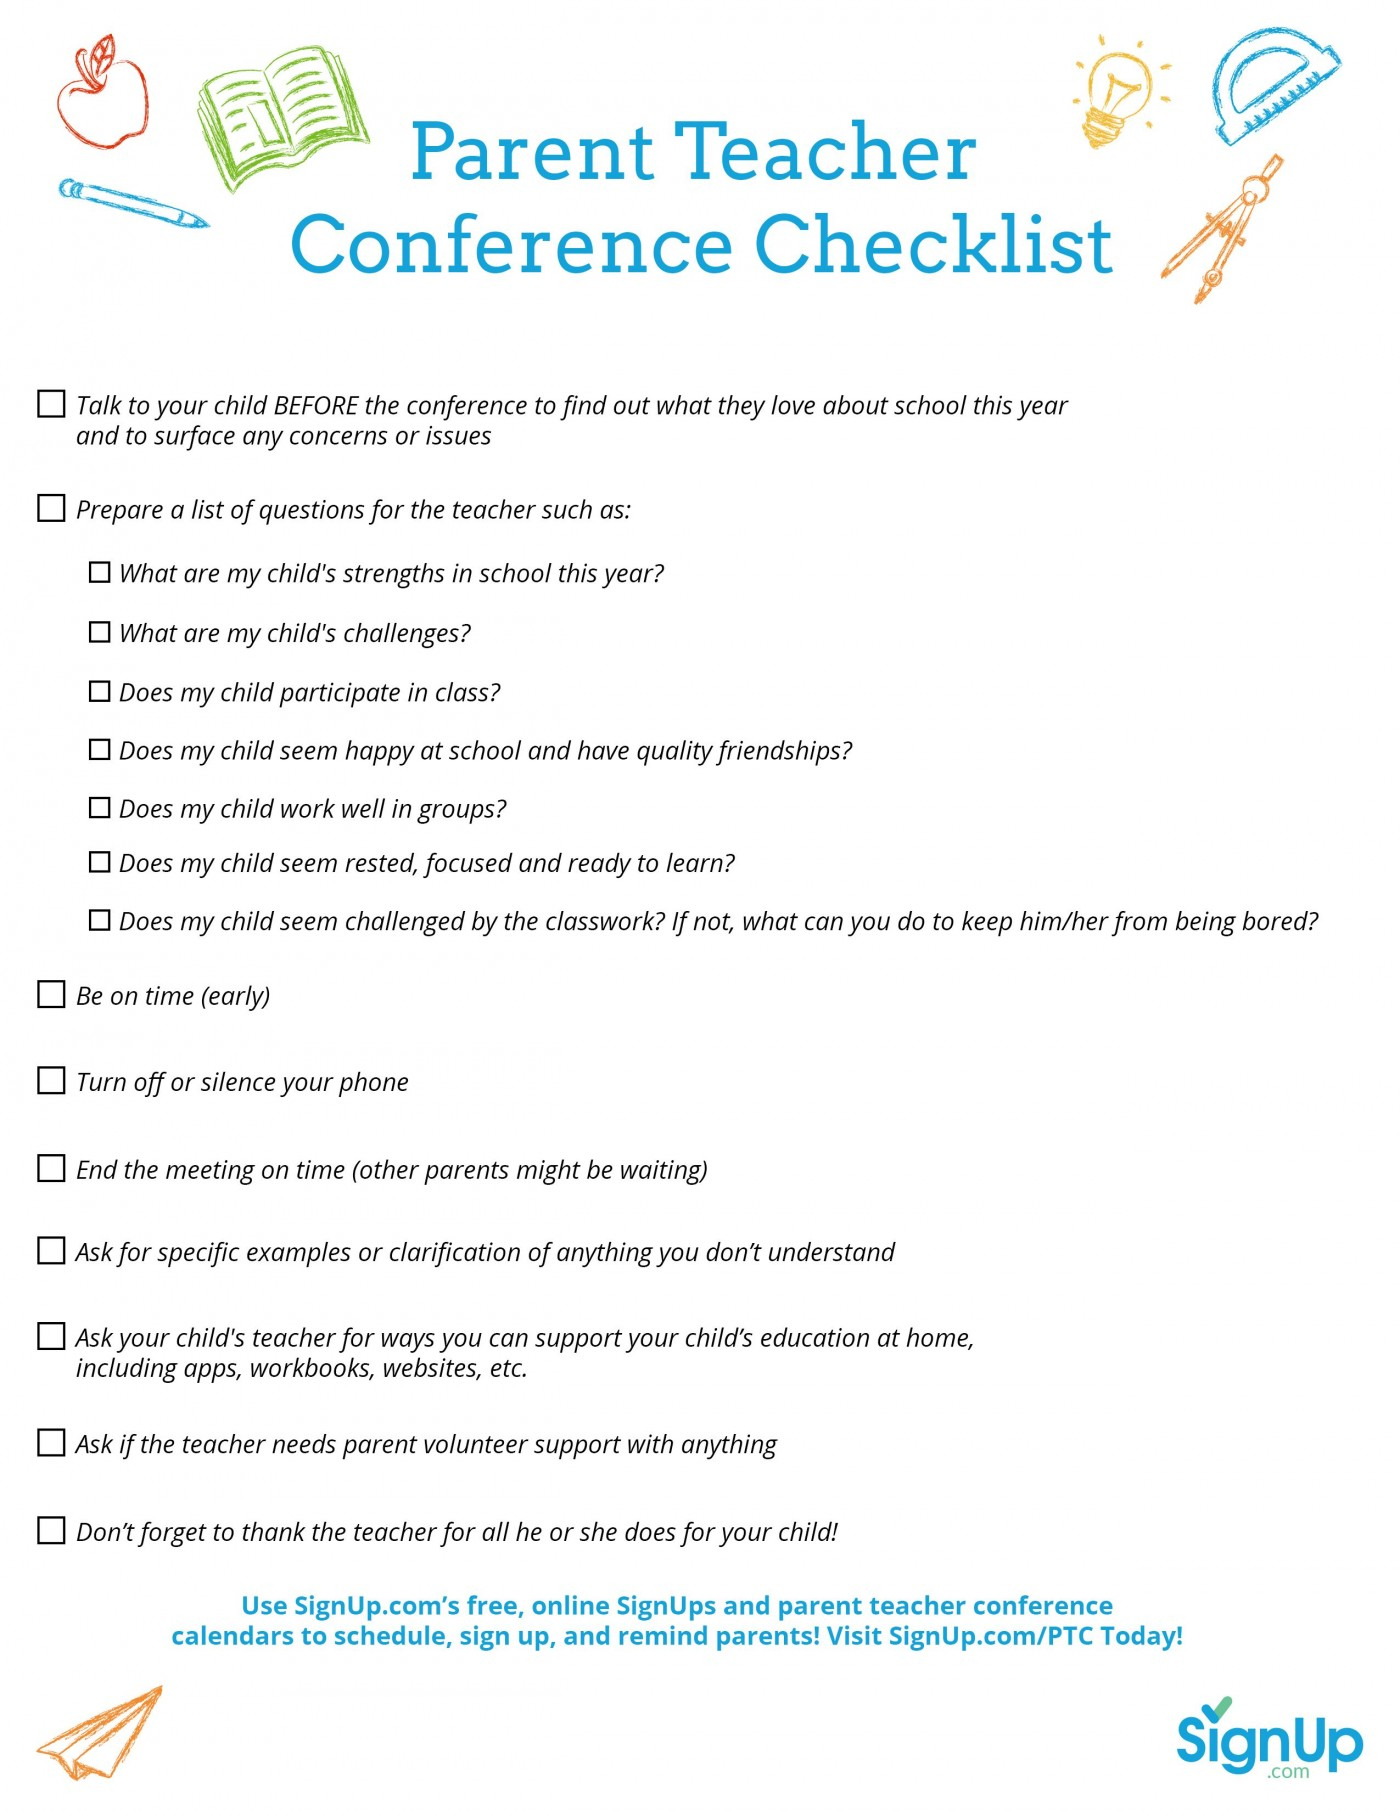 Parent Teacher Conference Schedule Template Checklist with dimensions 1400 X 1811